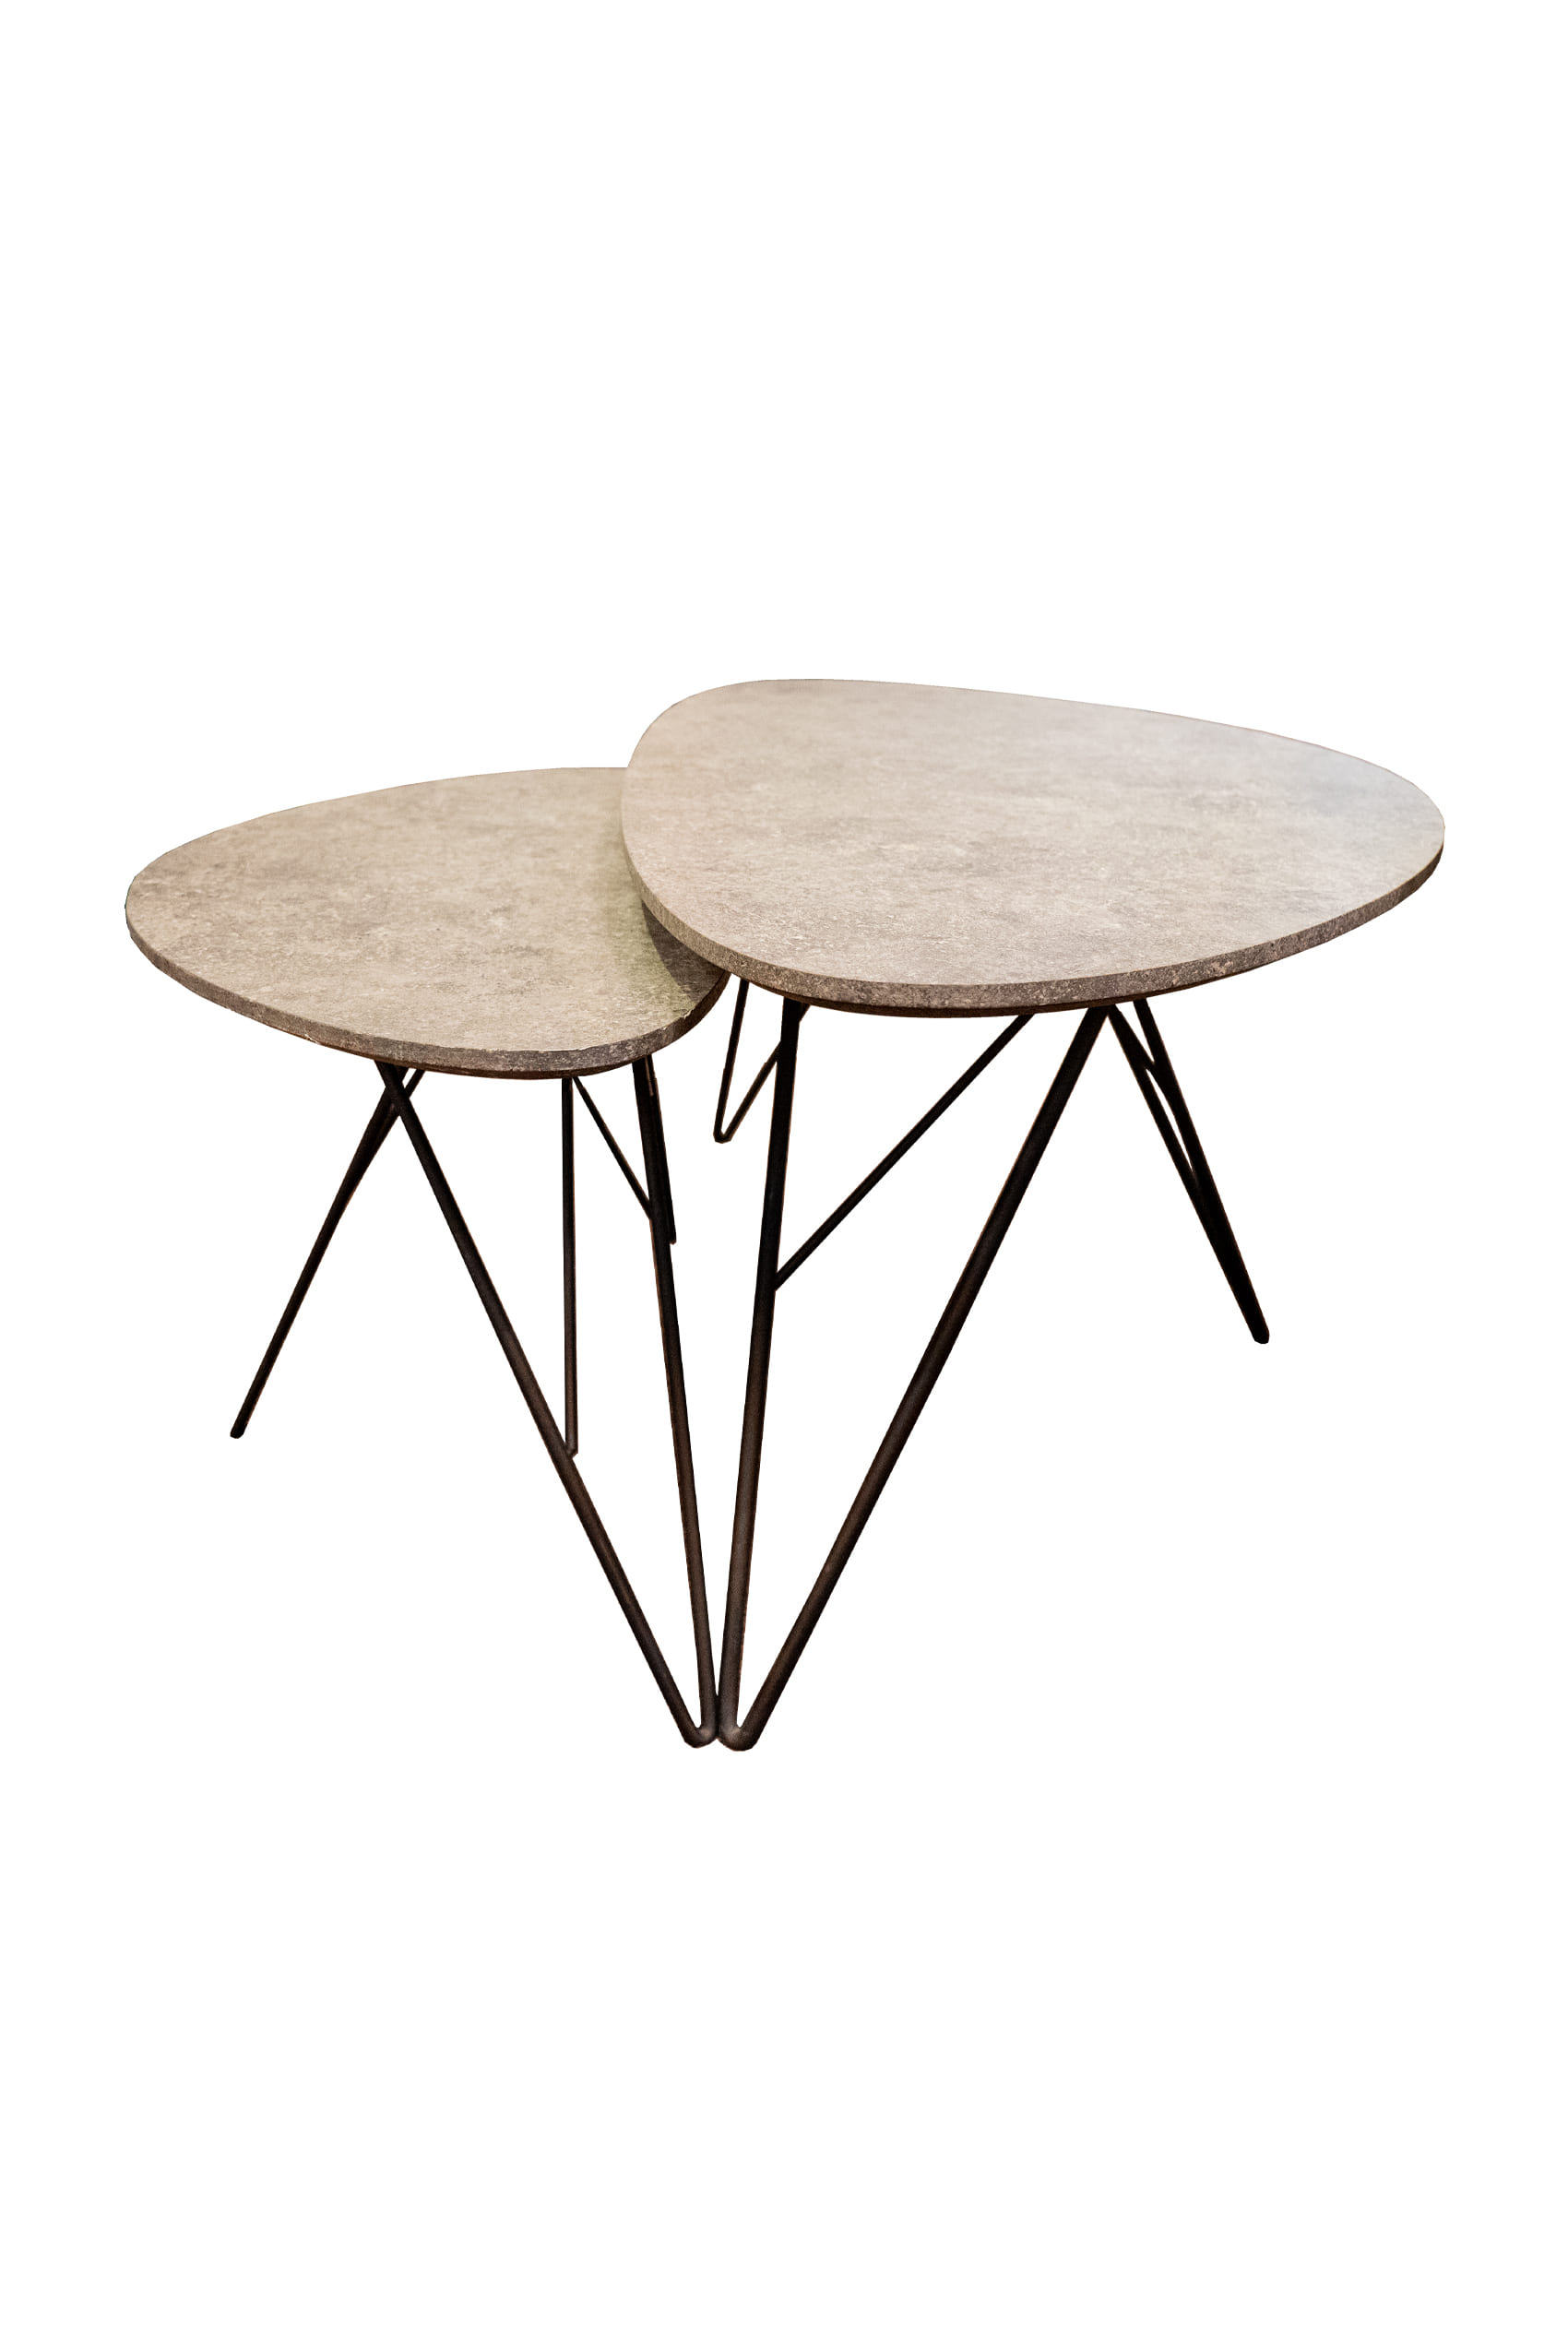 Plectra Coffee Table